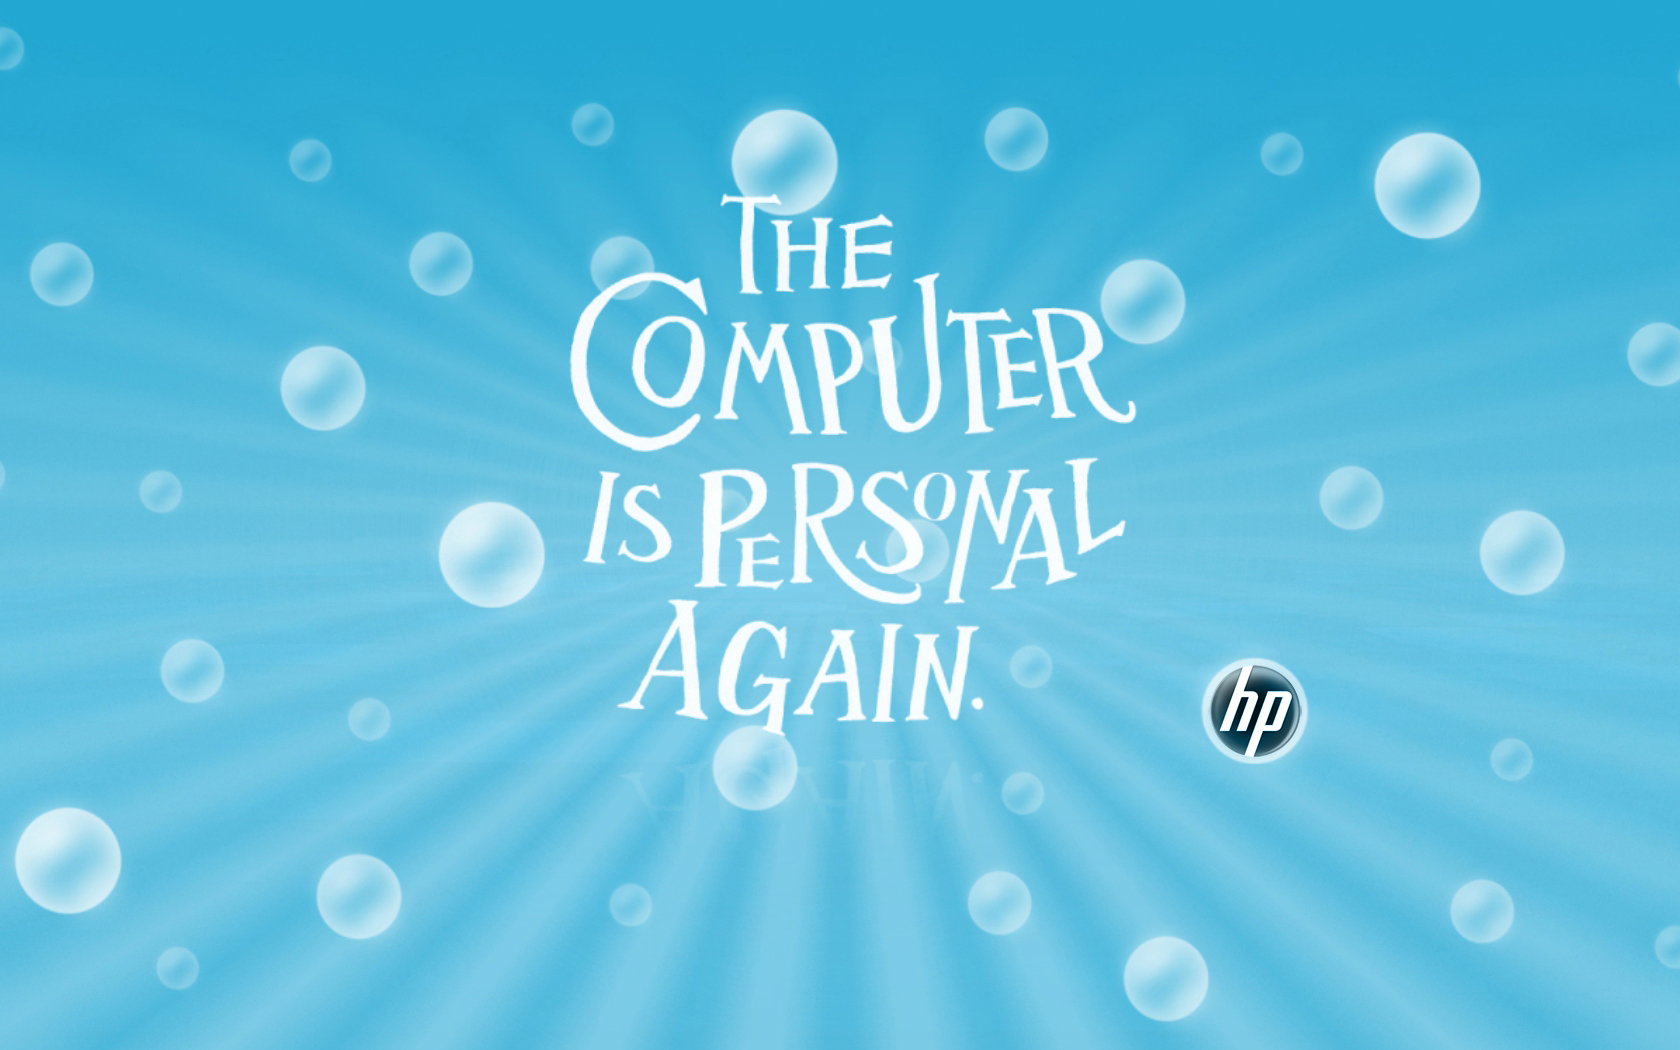 Personal Again Hp Wallpaper For Pc Mac iPhone And iPad